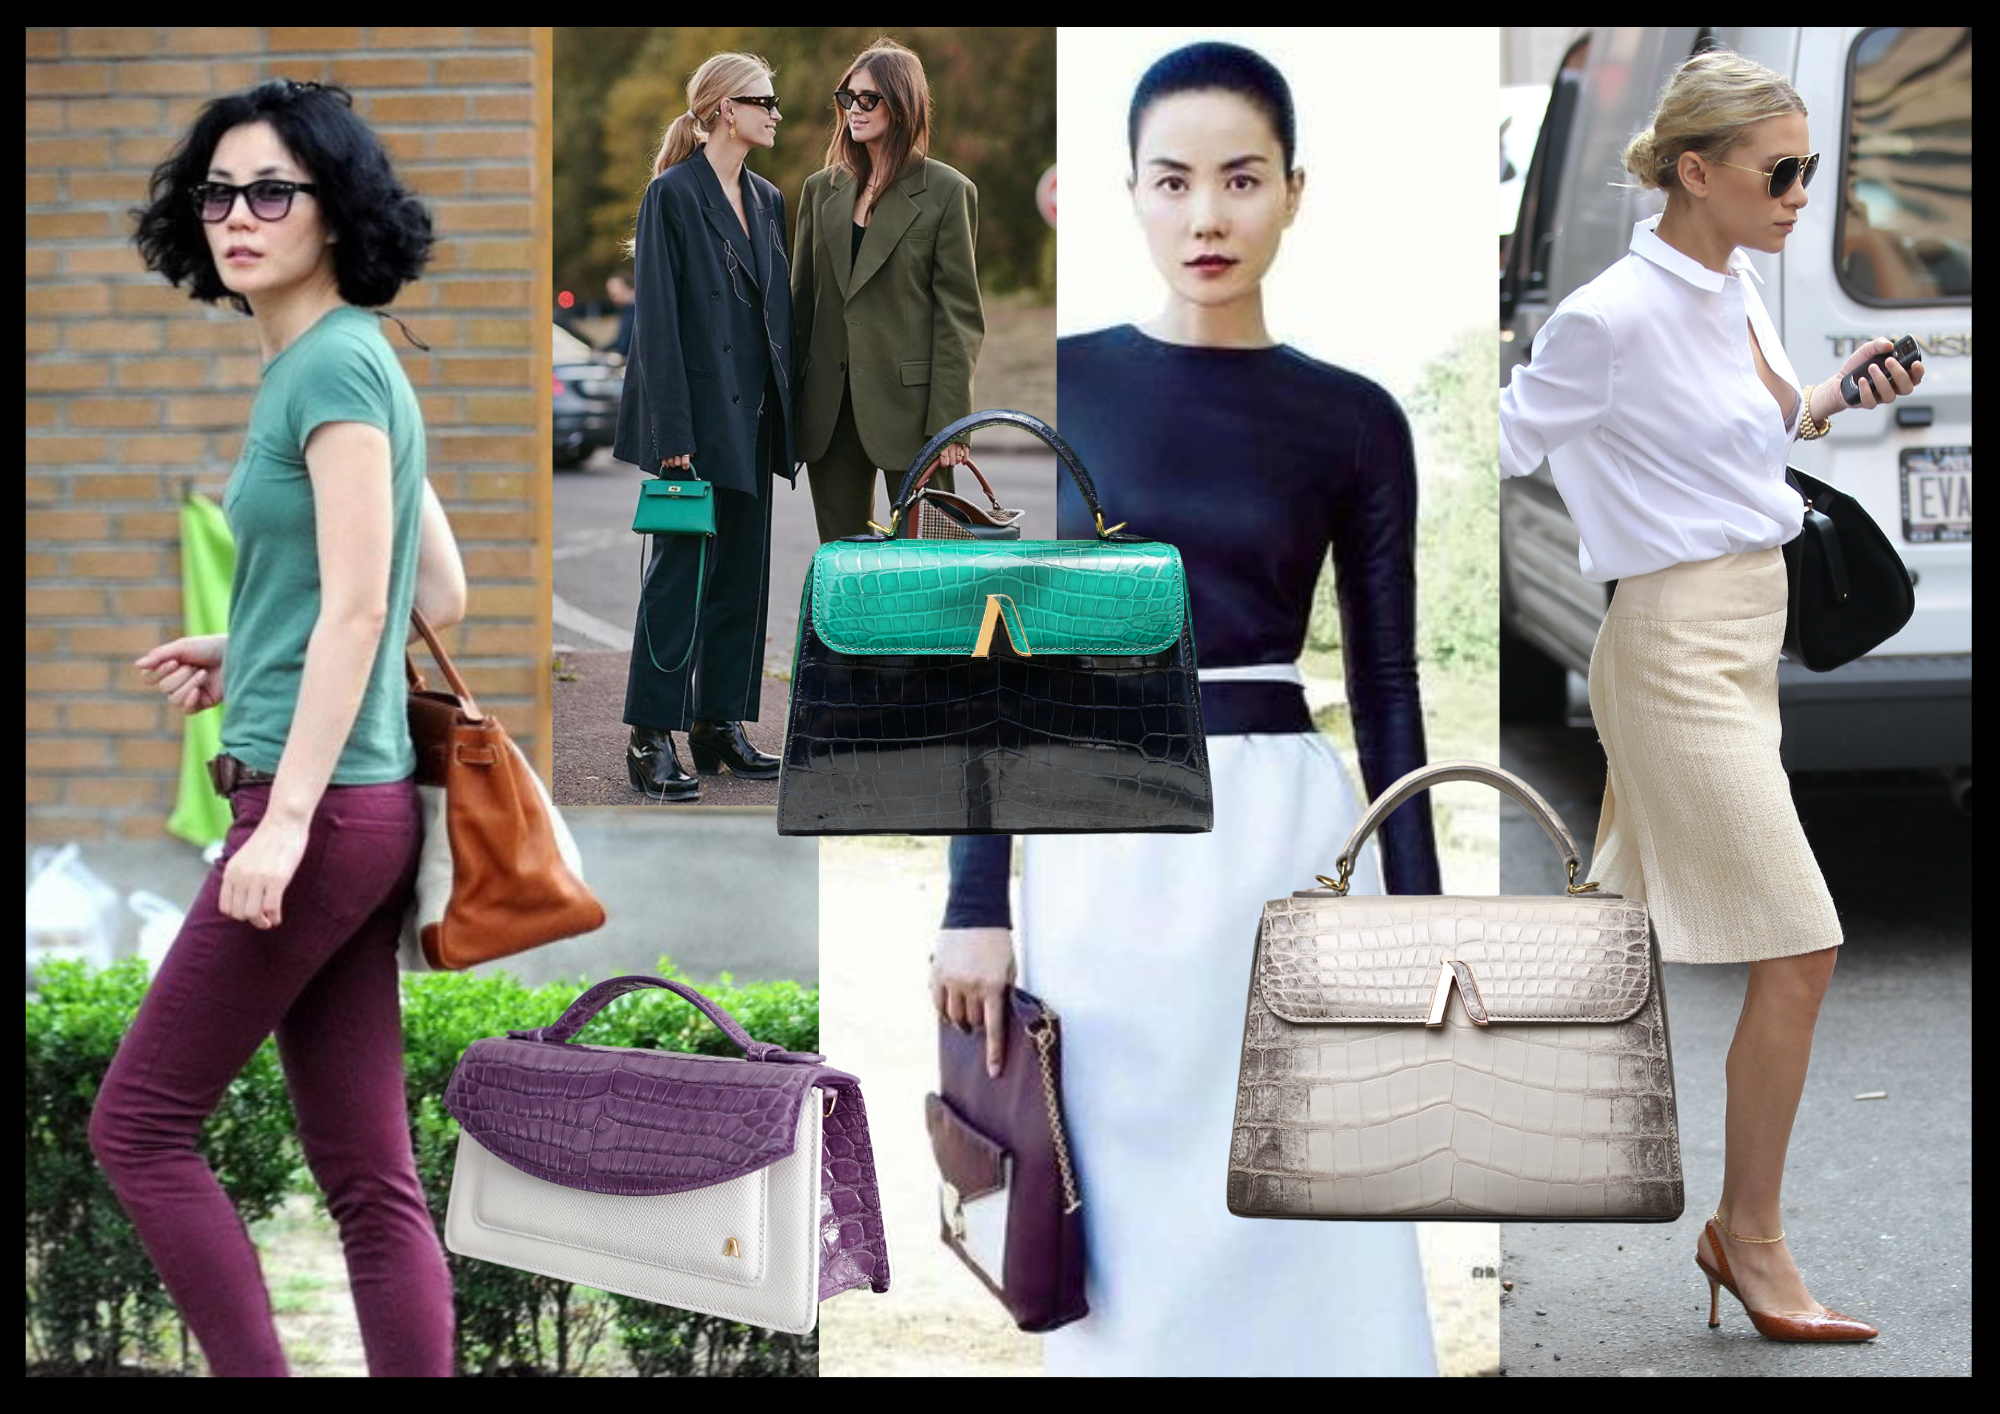 Styling Tips: 3 Ways to Match a Purse to Your Outfit